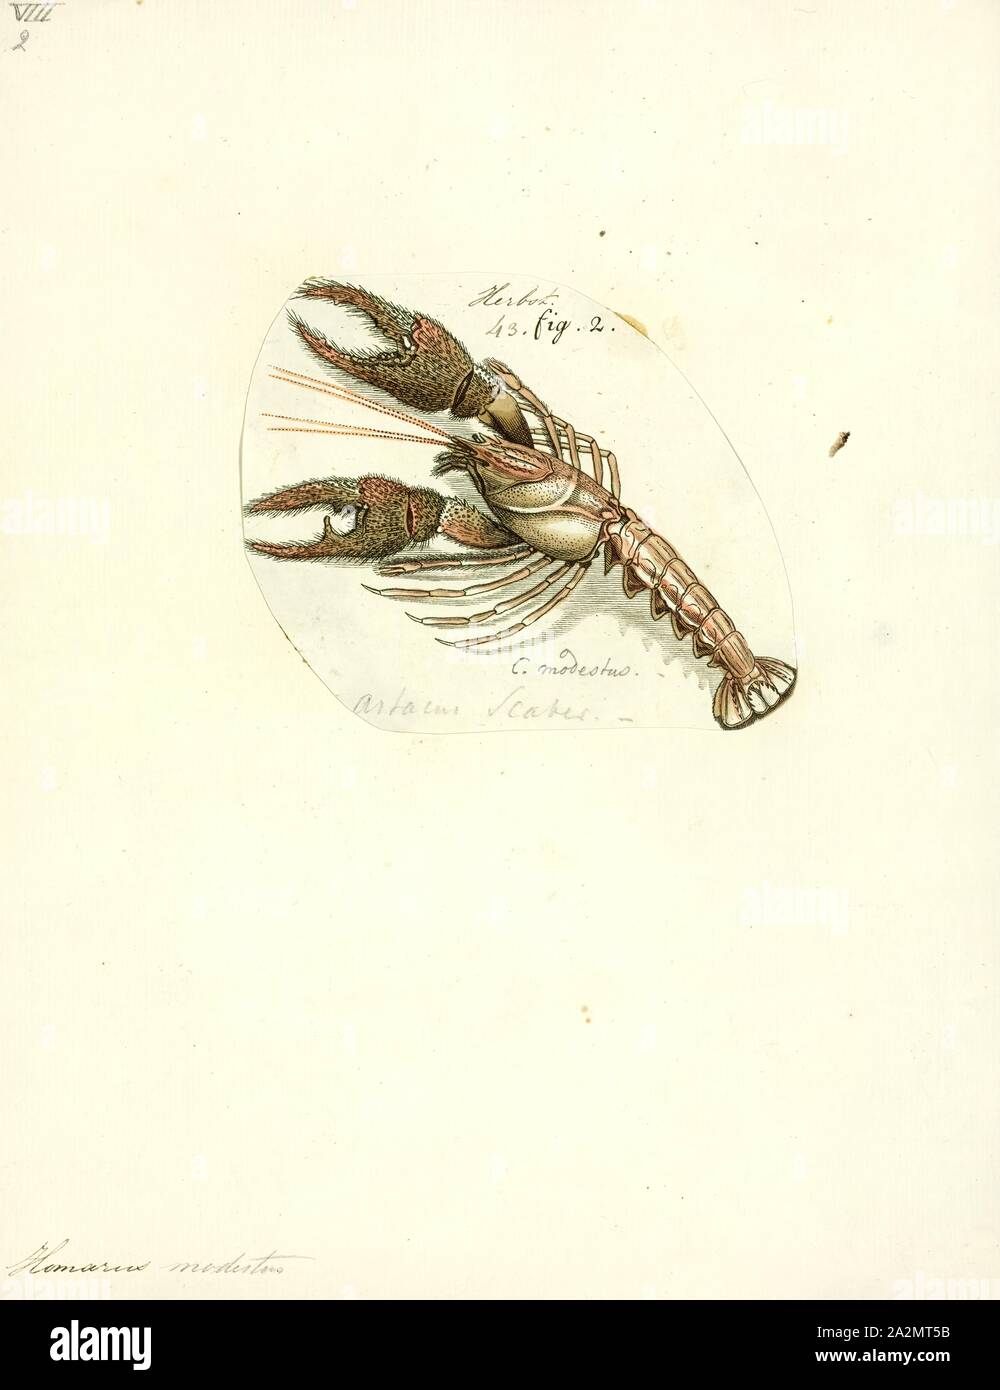 Homarus modestus, Print, Homarus is a genus of lobsters, which include the common and commercially significant species Homarus americanus (the American lobster) and Homarus gammarus (the European lobster). The Cape lobster, which was formerly in this genus as H. capensis, was moved in 1995 to the new genus Homarinus Stock Photo